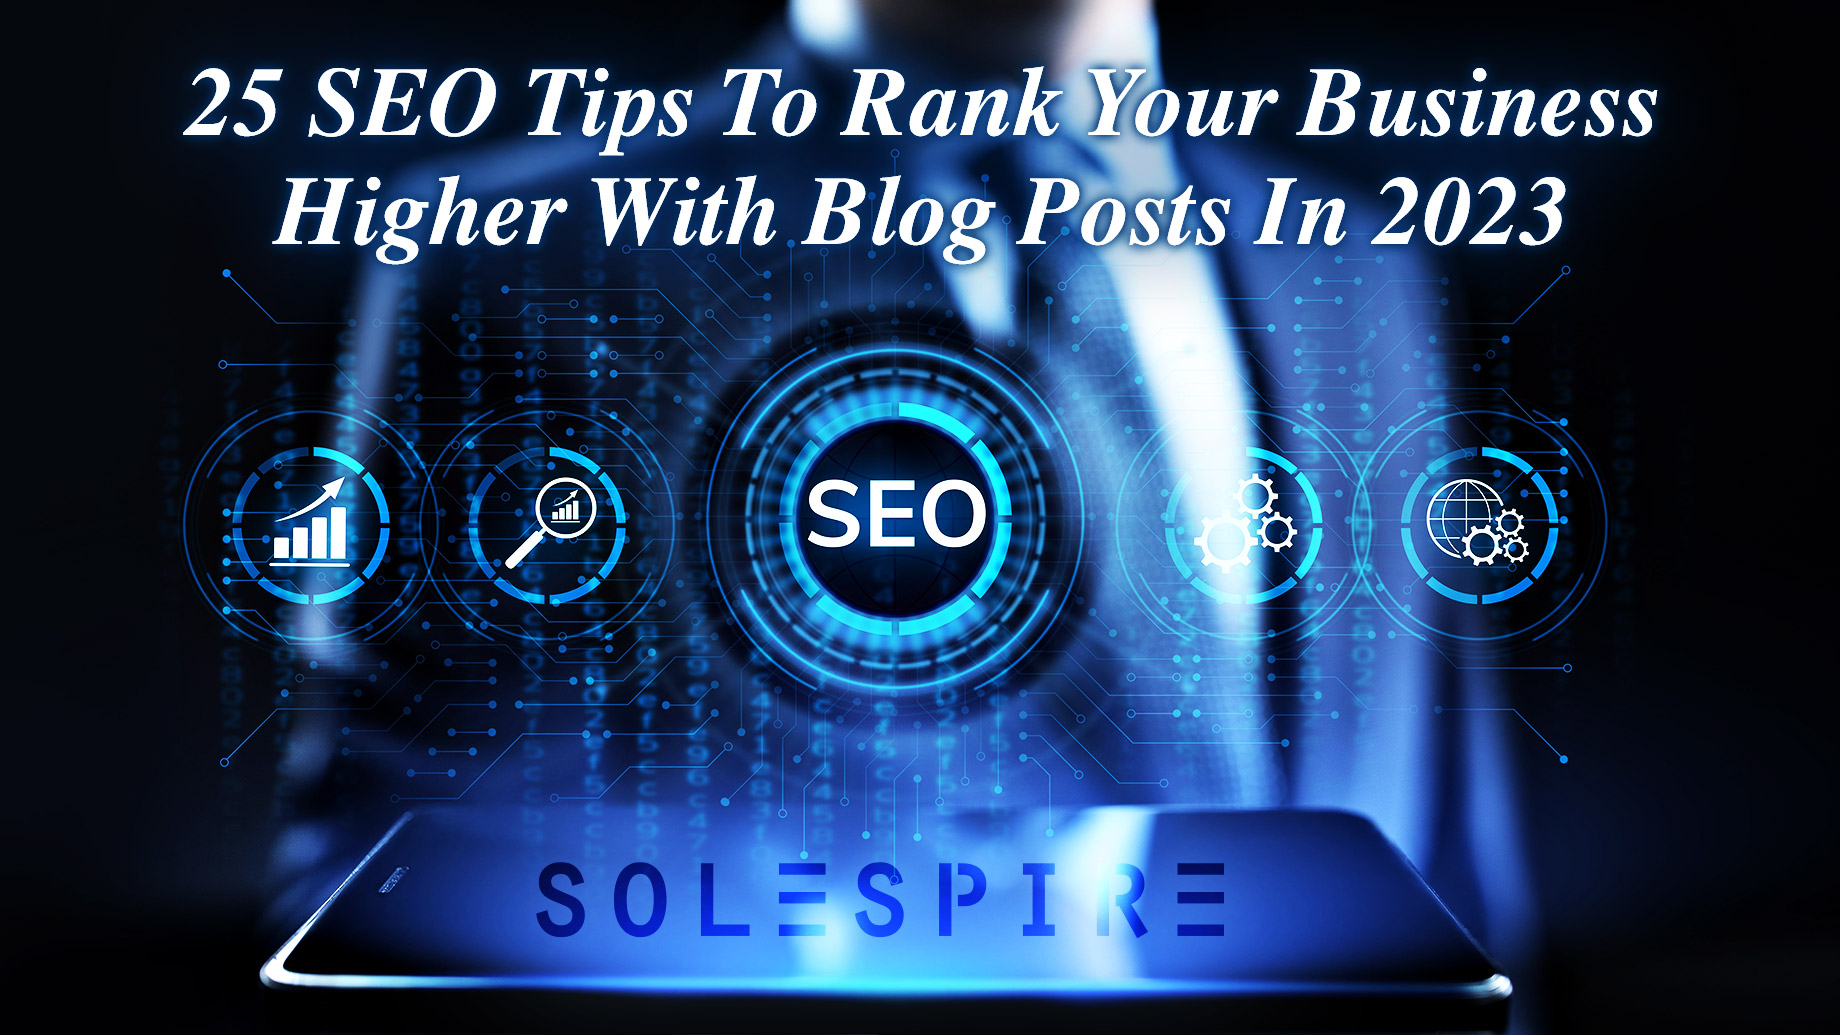 25 SEO Tips To Rank Your Business Higher With Blog Posts In 2023